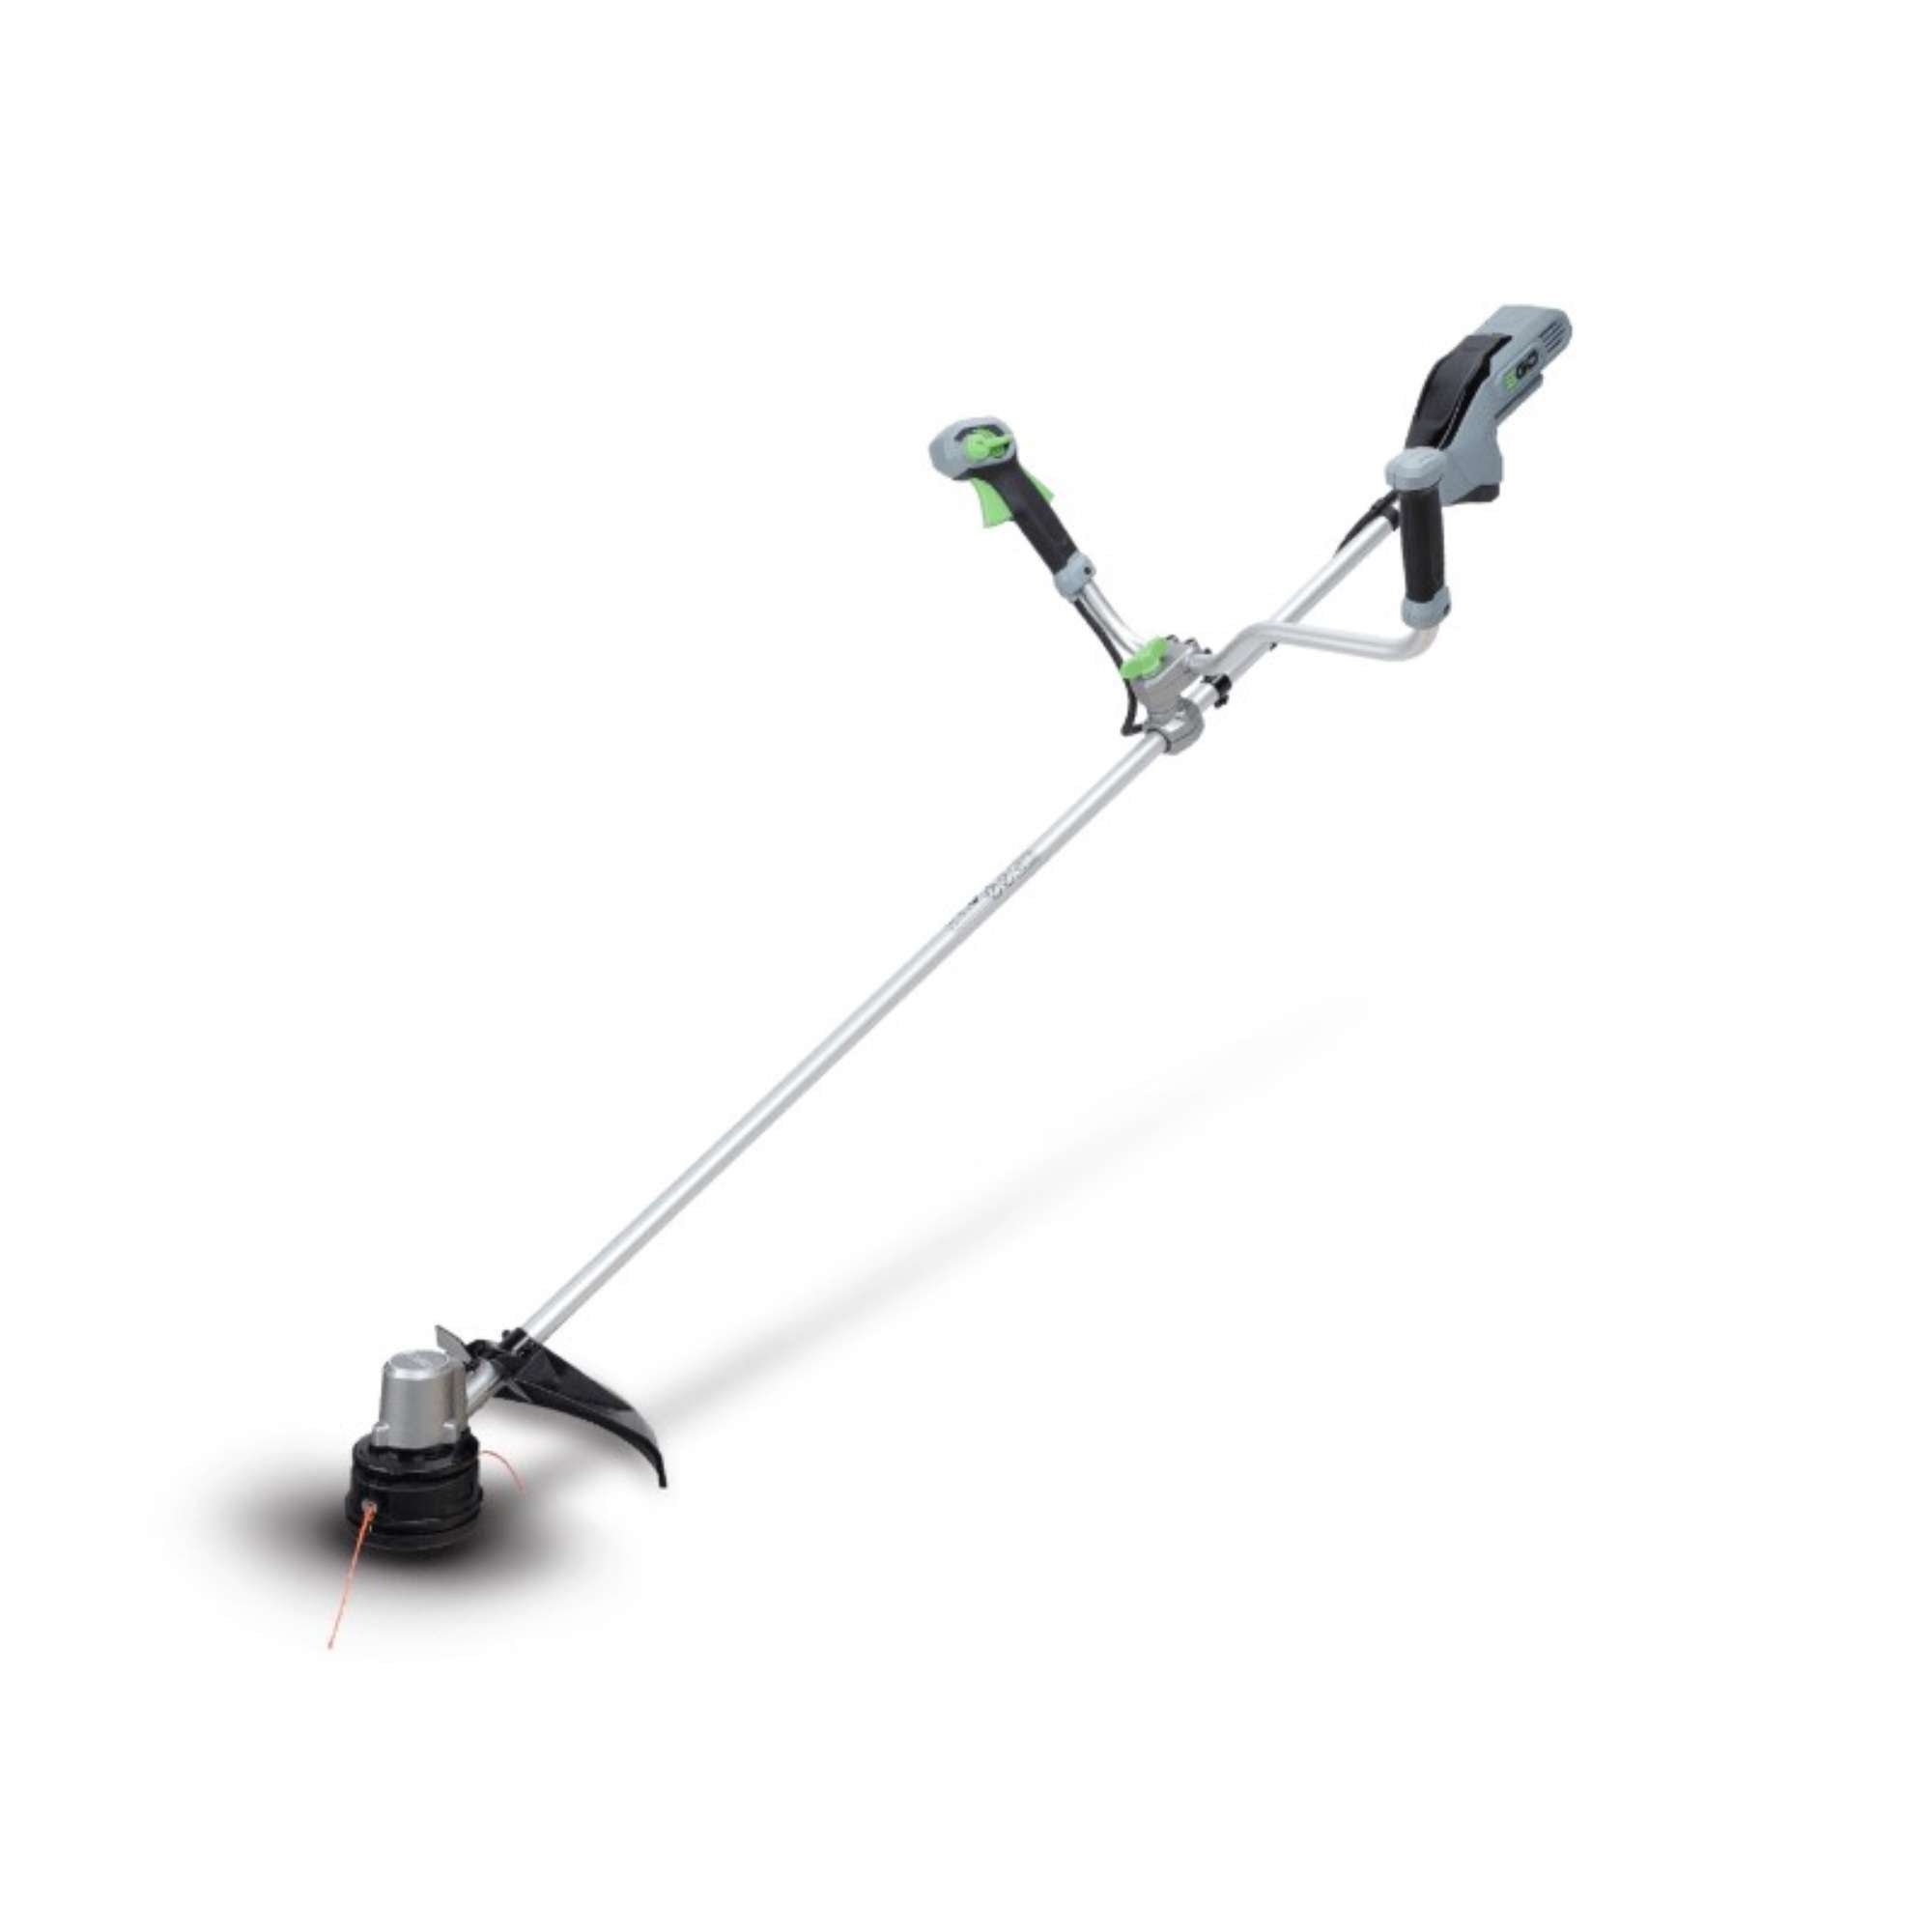 Corded brushcutter with double handle 38cm body only - Ego 38000 BC1500E-F